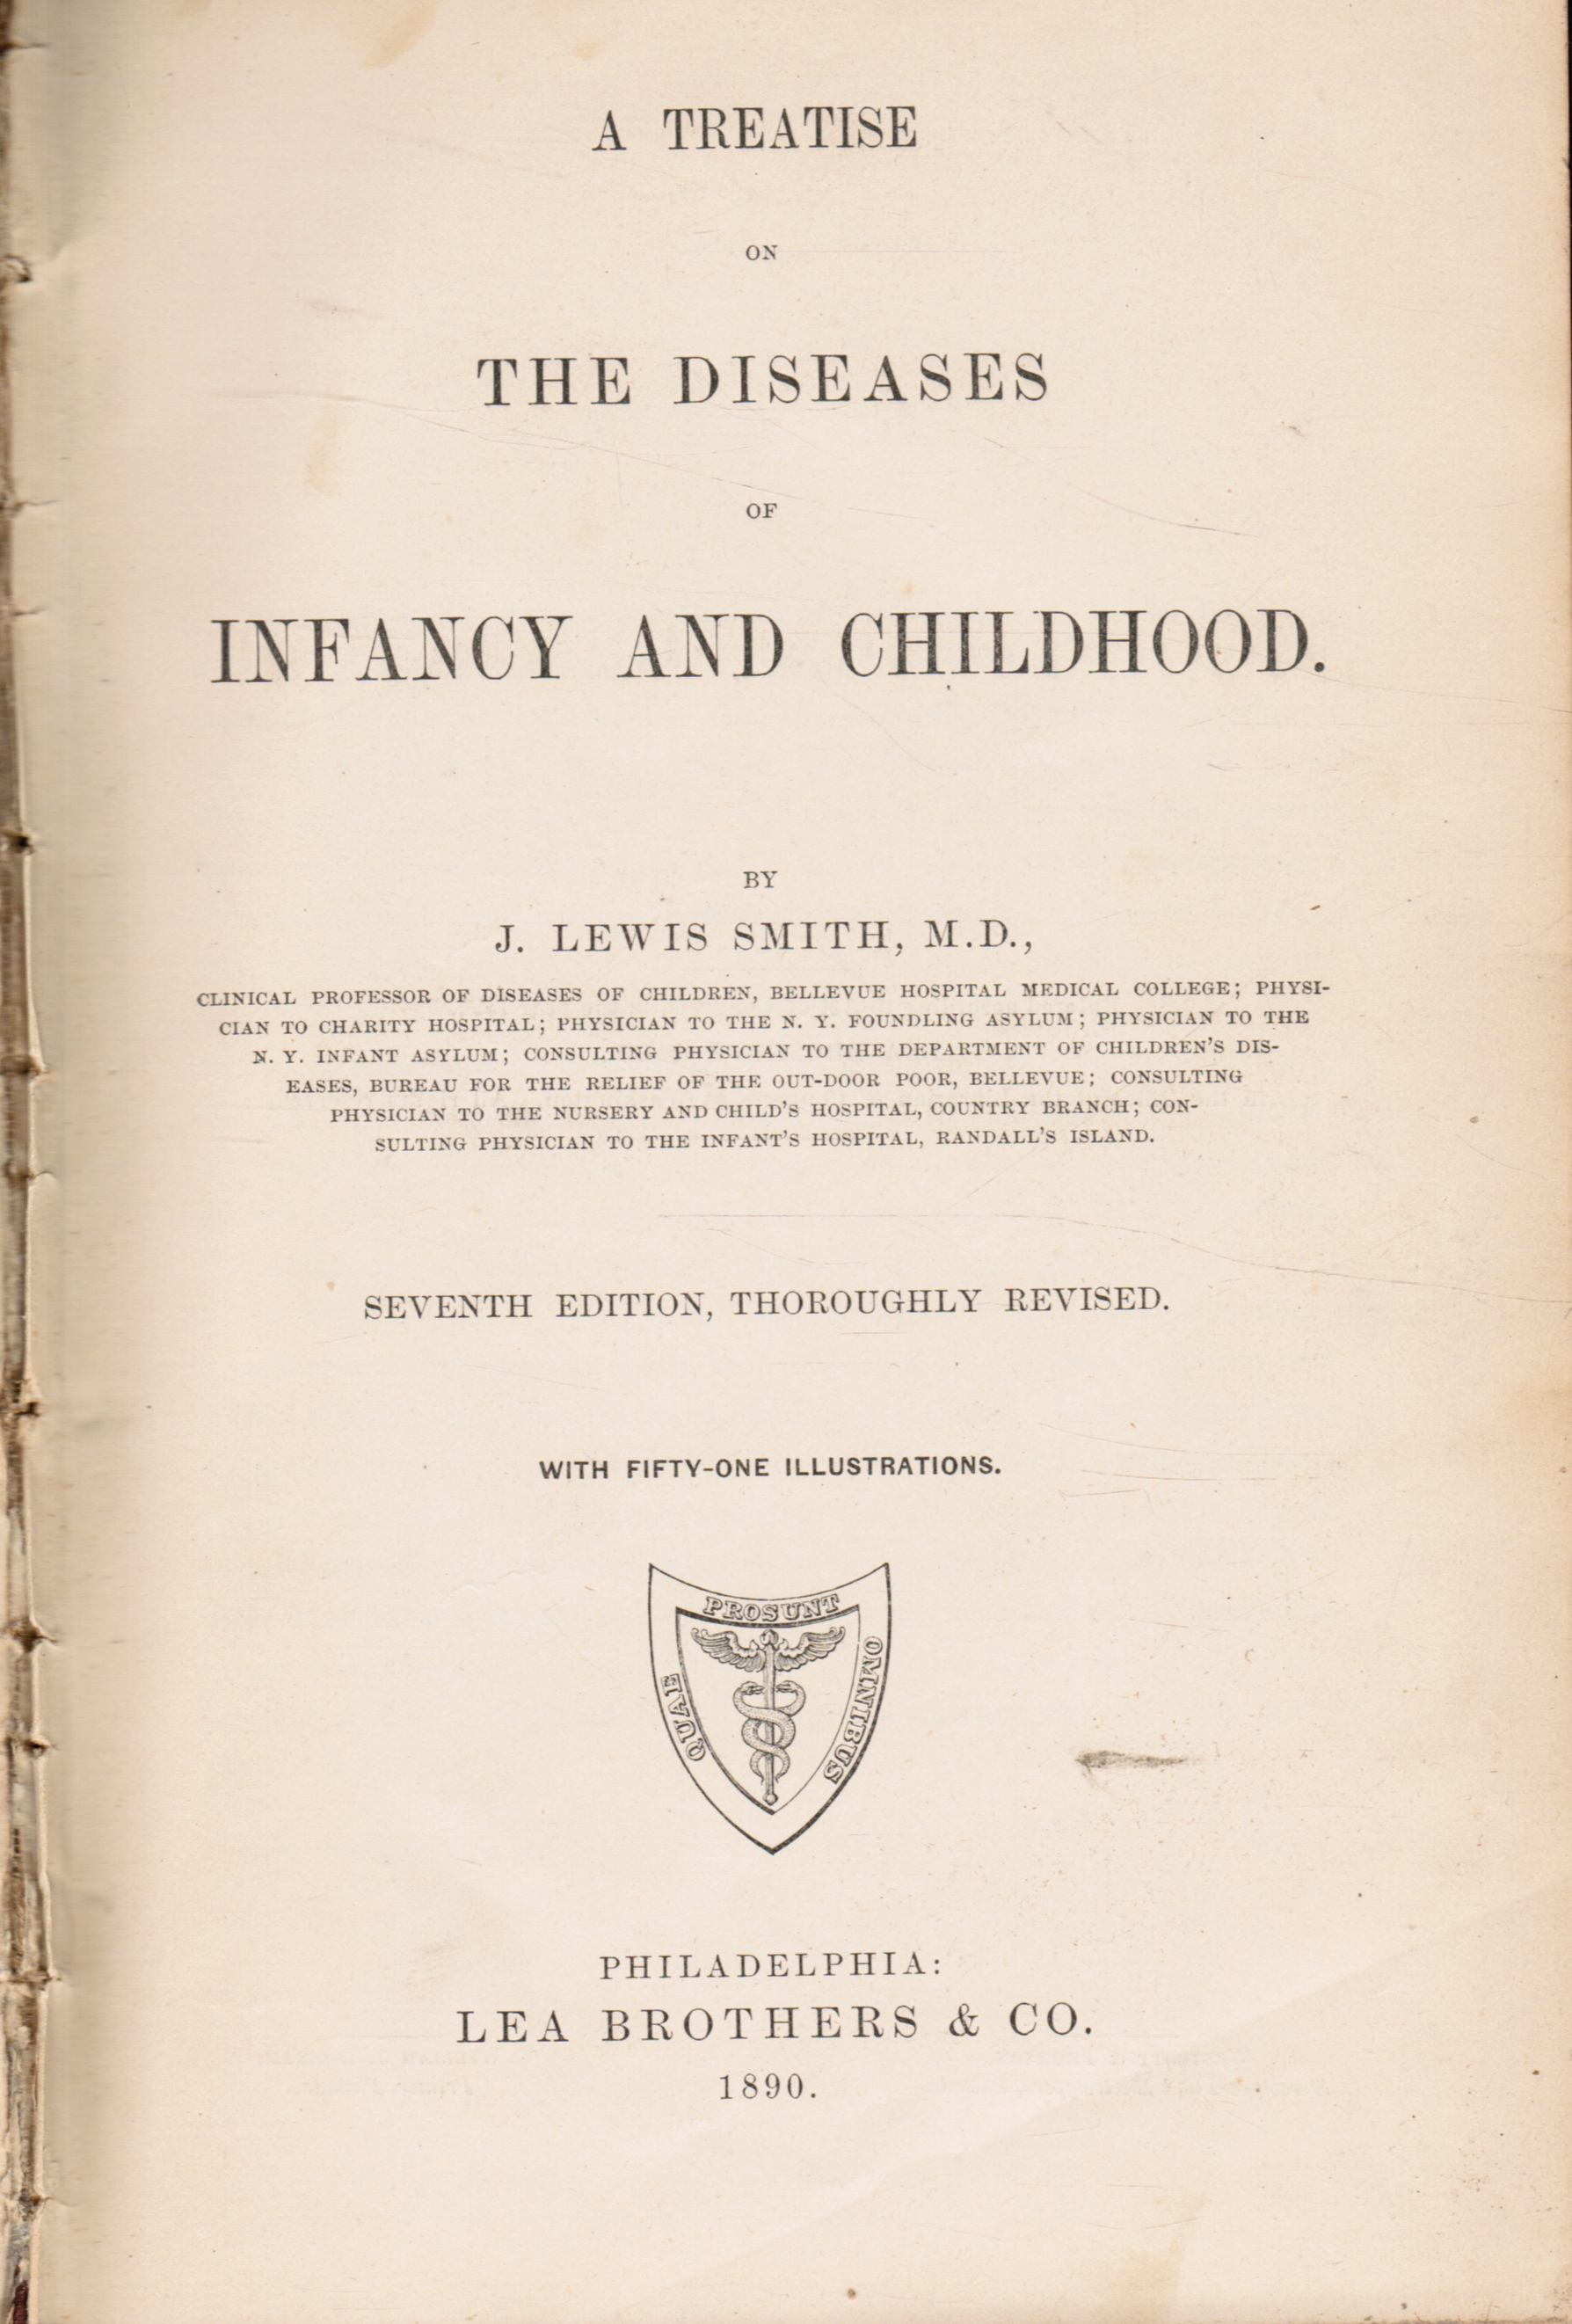 SMITH, J. LEWIS - A Treatise on the Diseases of Infancy and Childhood